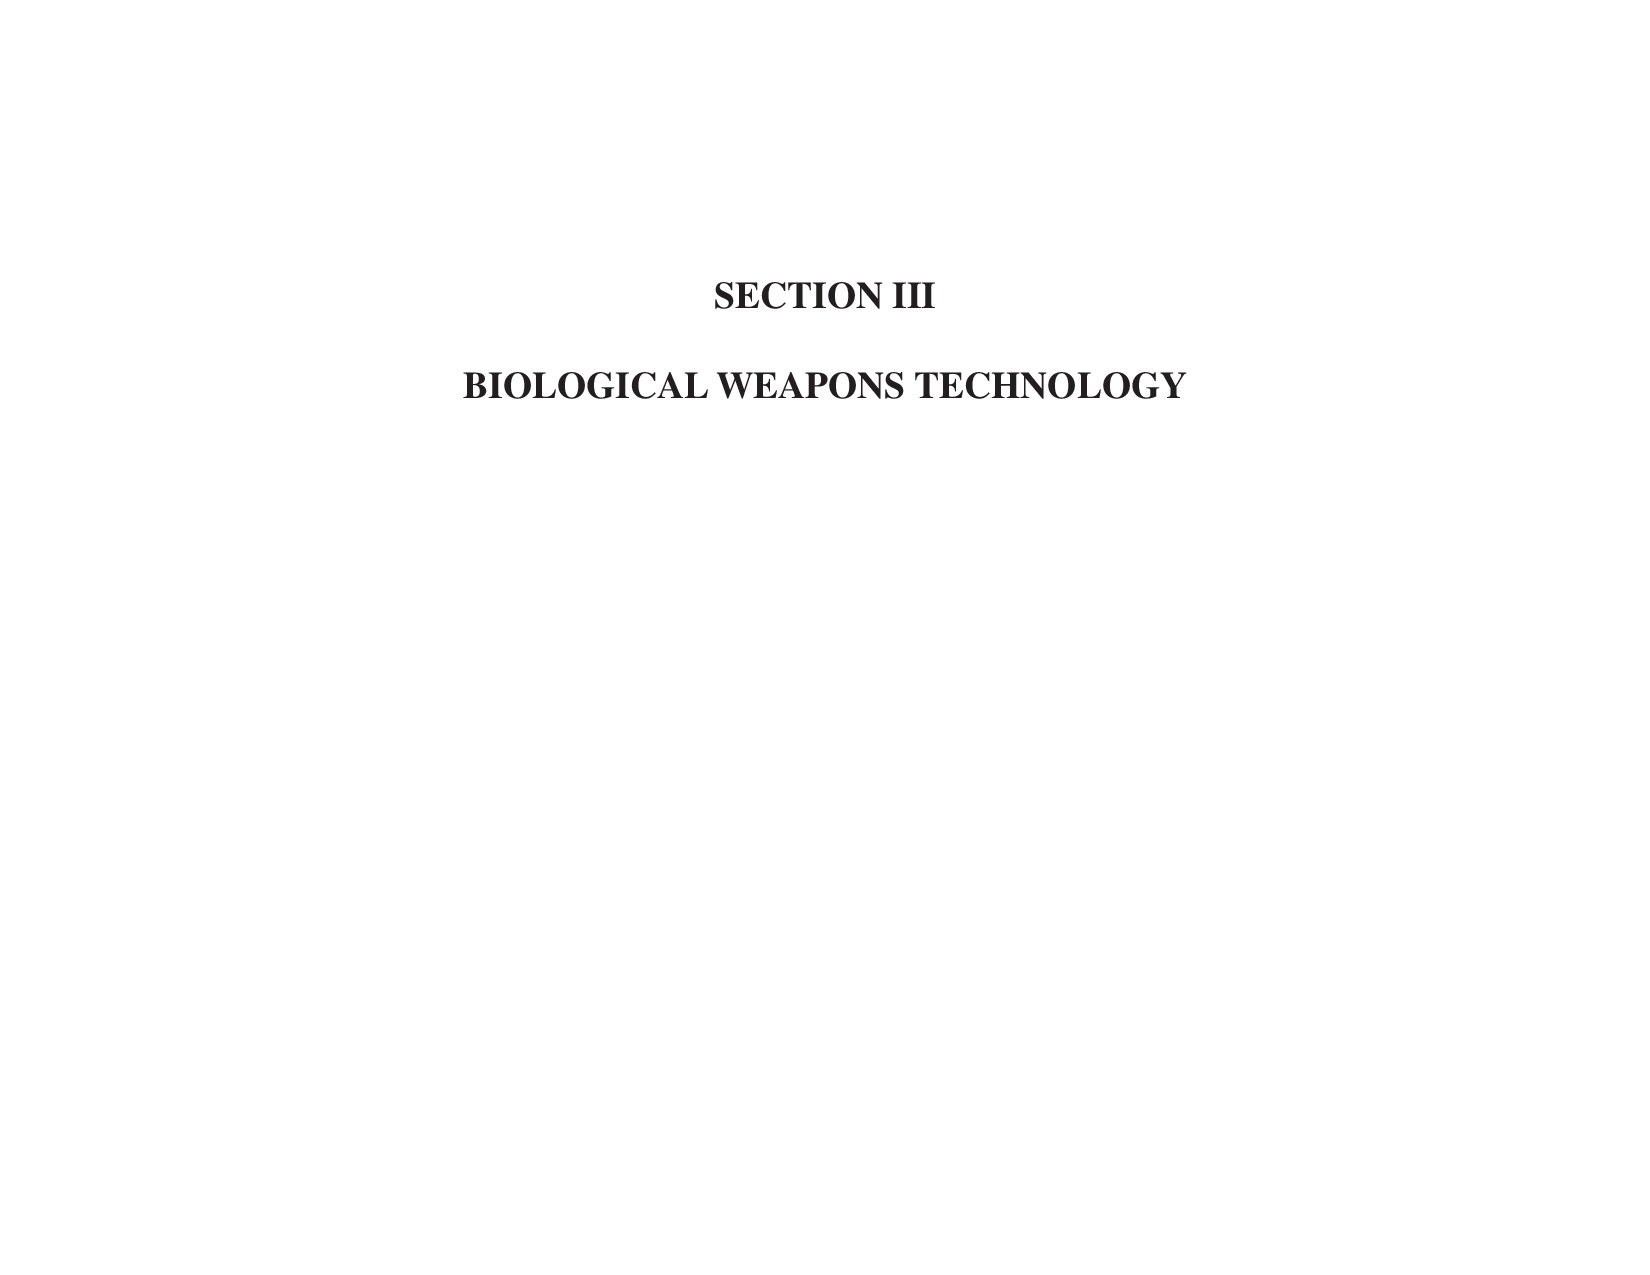 Biological Weapons Technology